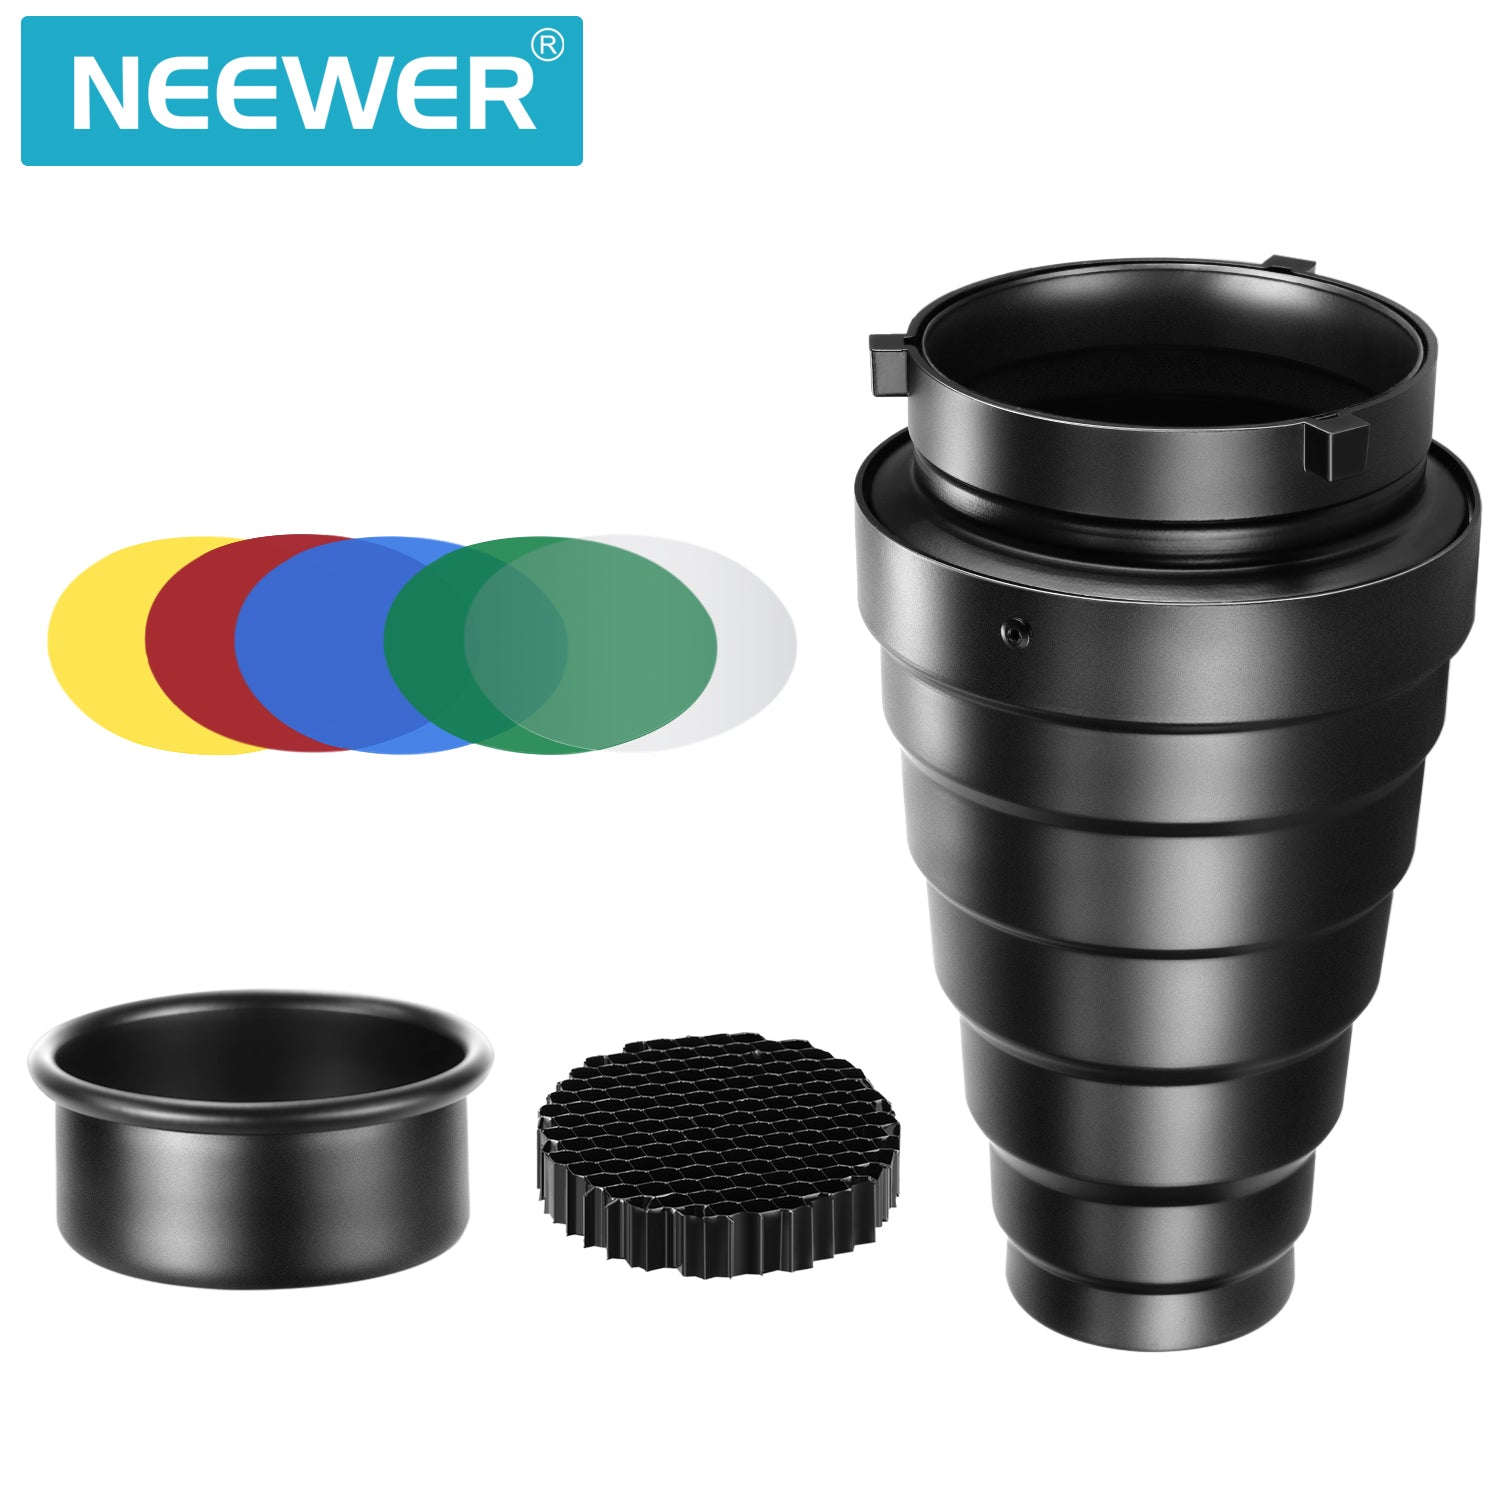 Neewer Medium/Large Aluminium Alloy Conical Snoot Kit with Honeycomb Grid and 5 Pieces Color Gel Filters